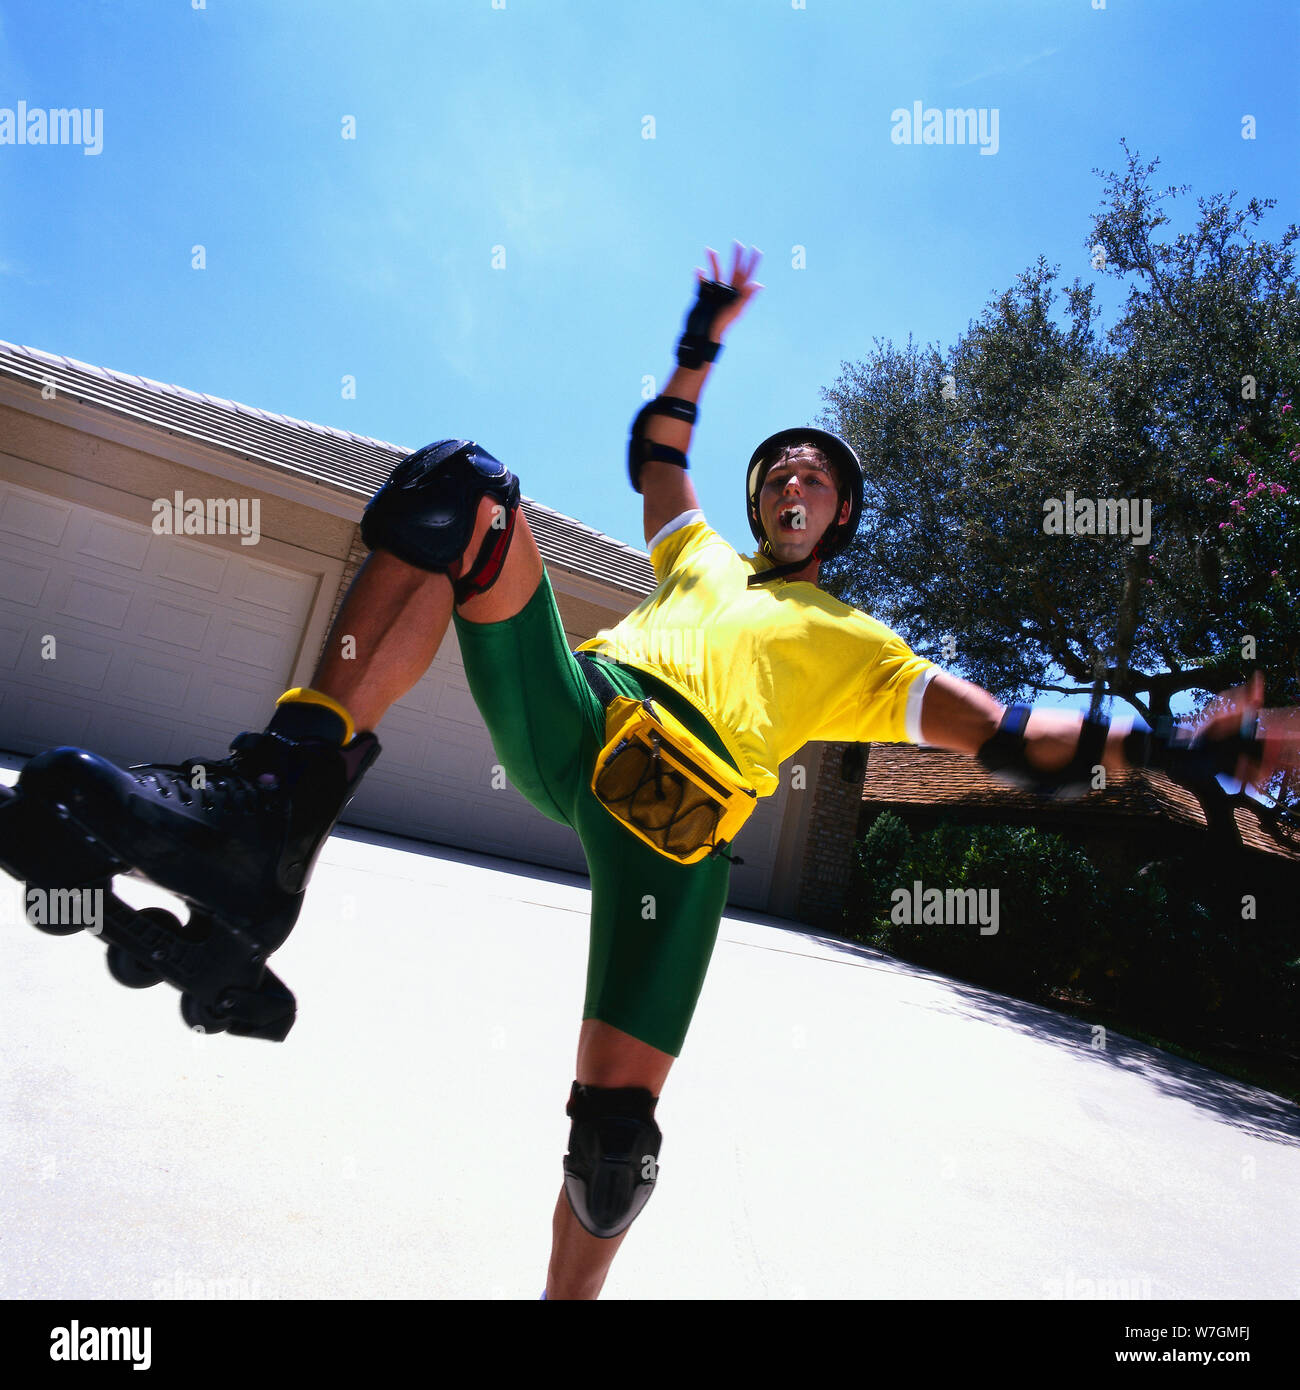 Roller skater falling in the air Stock Photo